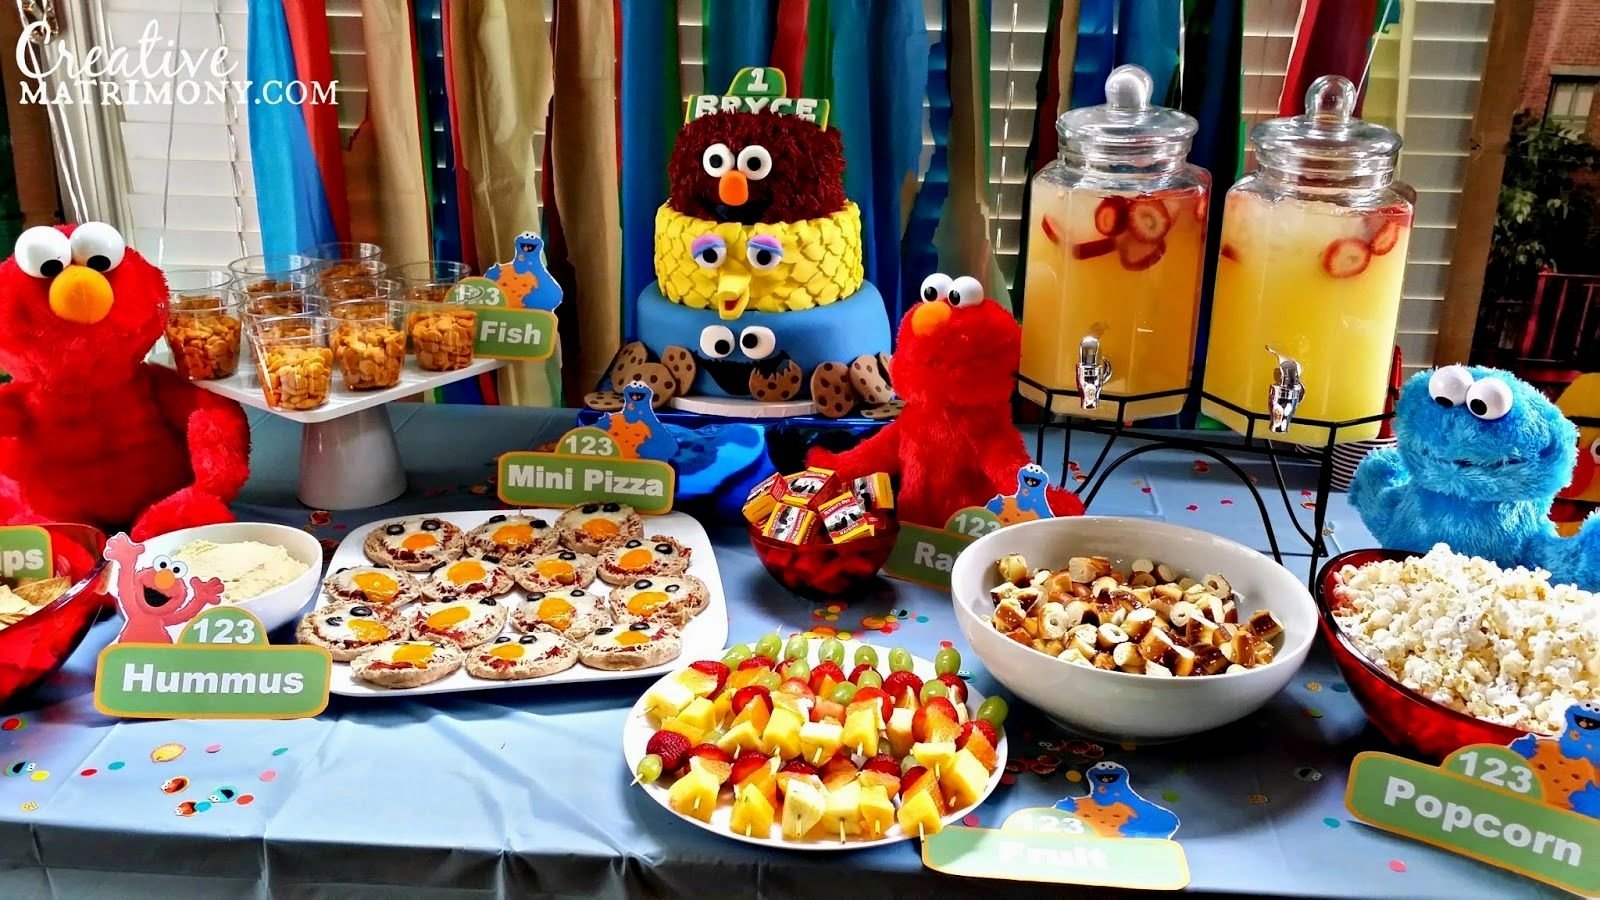 10 Stunning Sesame Street 1St Birthday Party Ideas sesame street 1st birthday party ideas archives decorating of party 1 2022